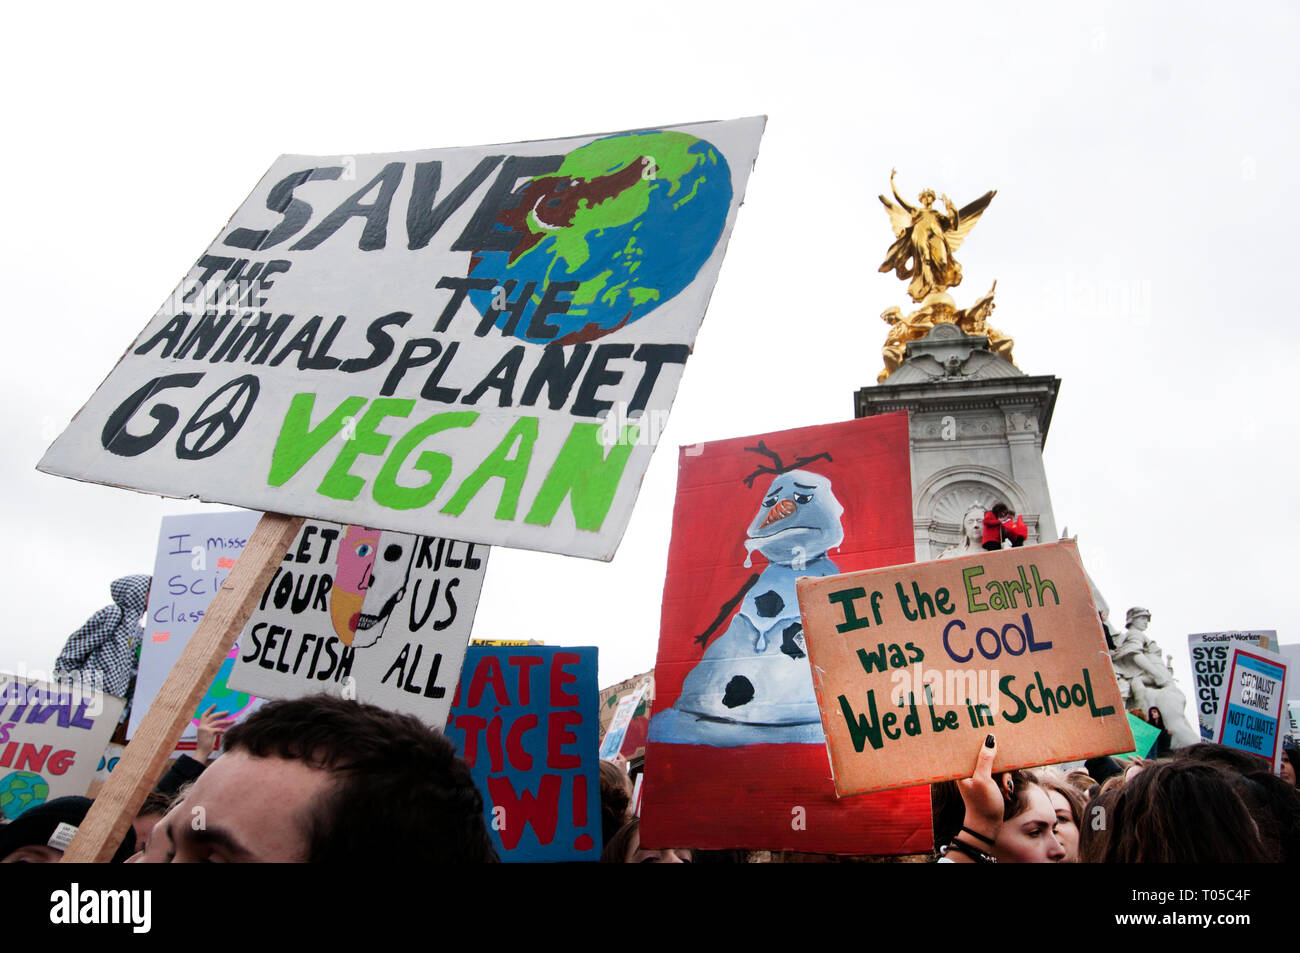 London. School students strike for climate change , part of a global action. A group take over the Victoria statue in front of Buckingham Palace. Stock Photo